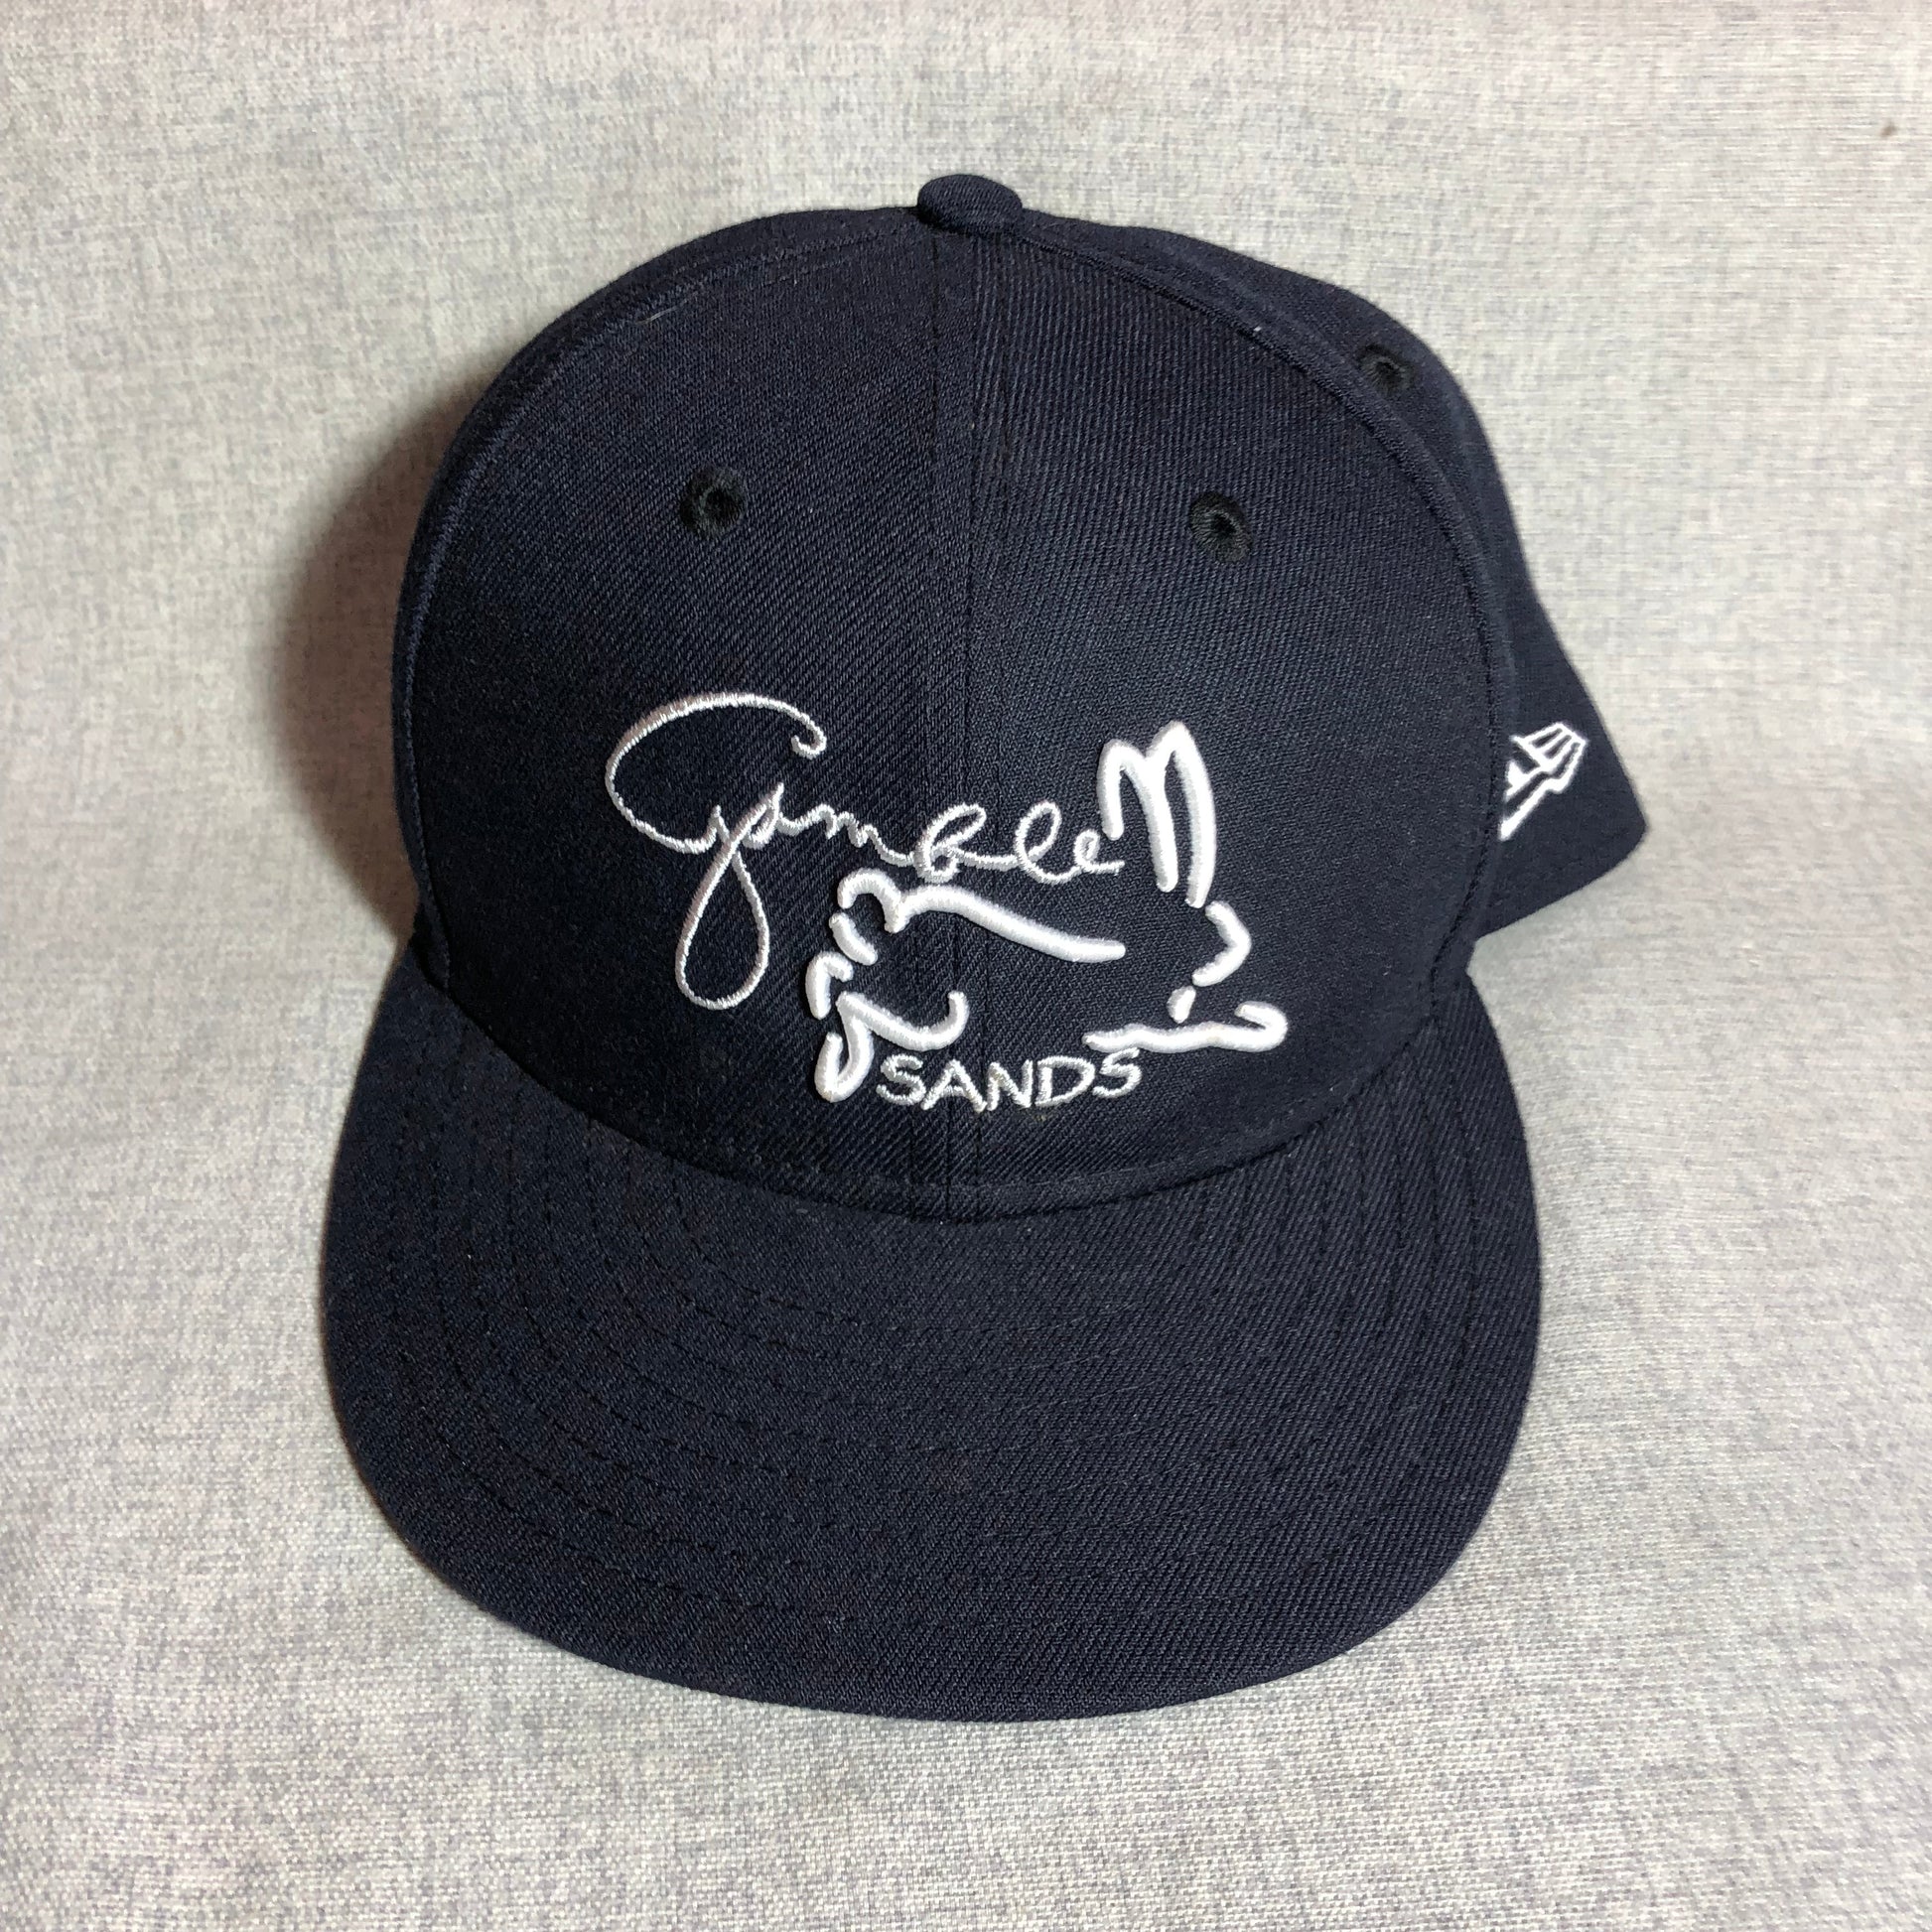 Gamble Sands Hat Preowned